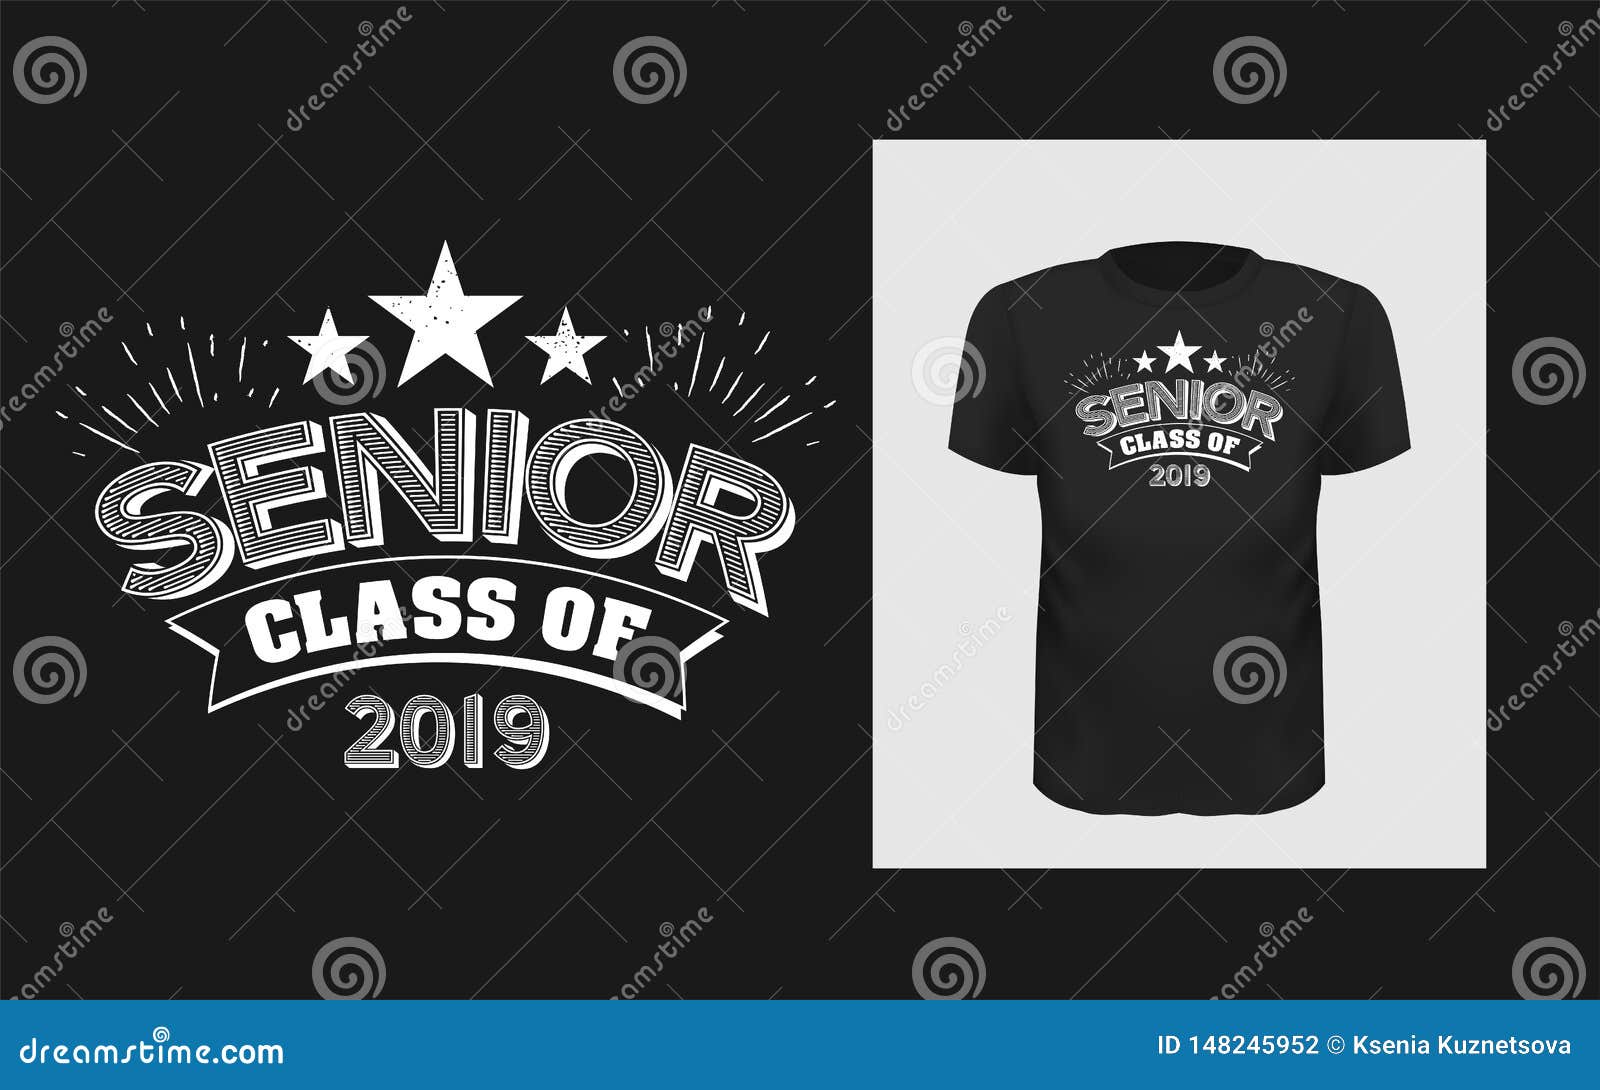 Tshirt Slogan Design. T Shirt Quote Print with a Phrase Senior of Class ...